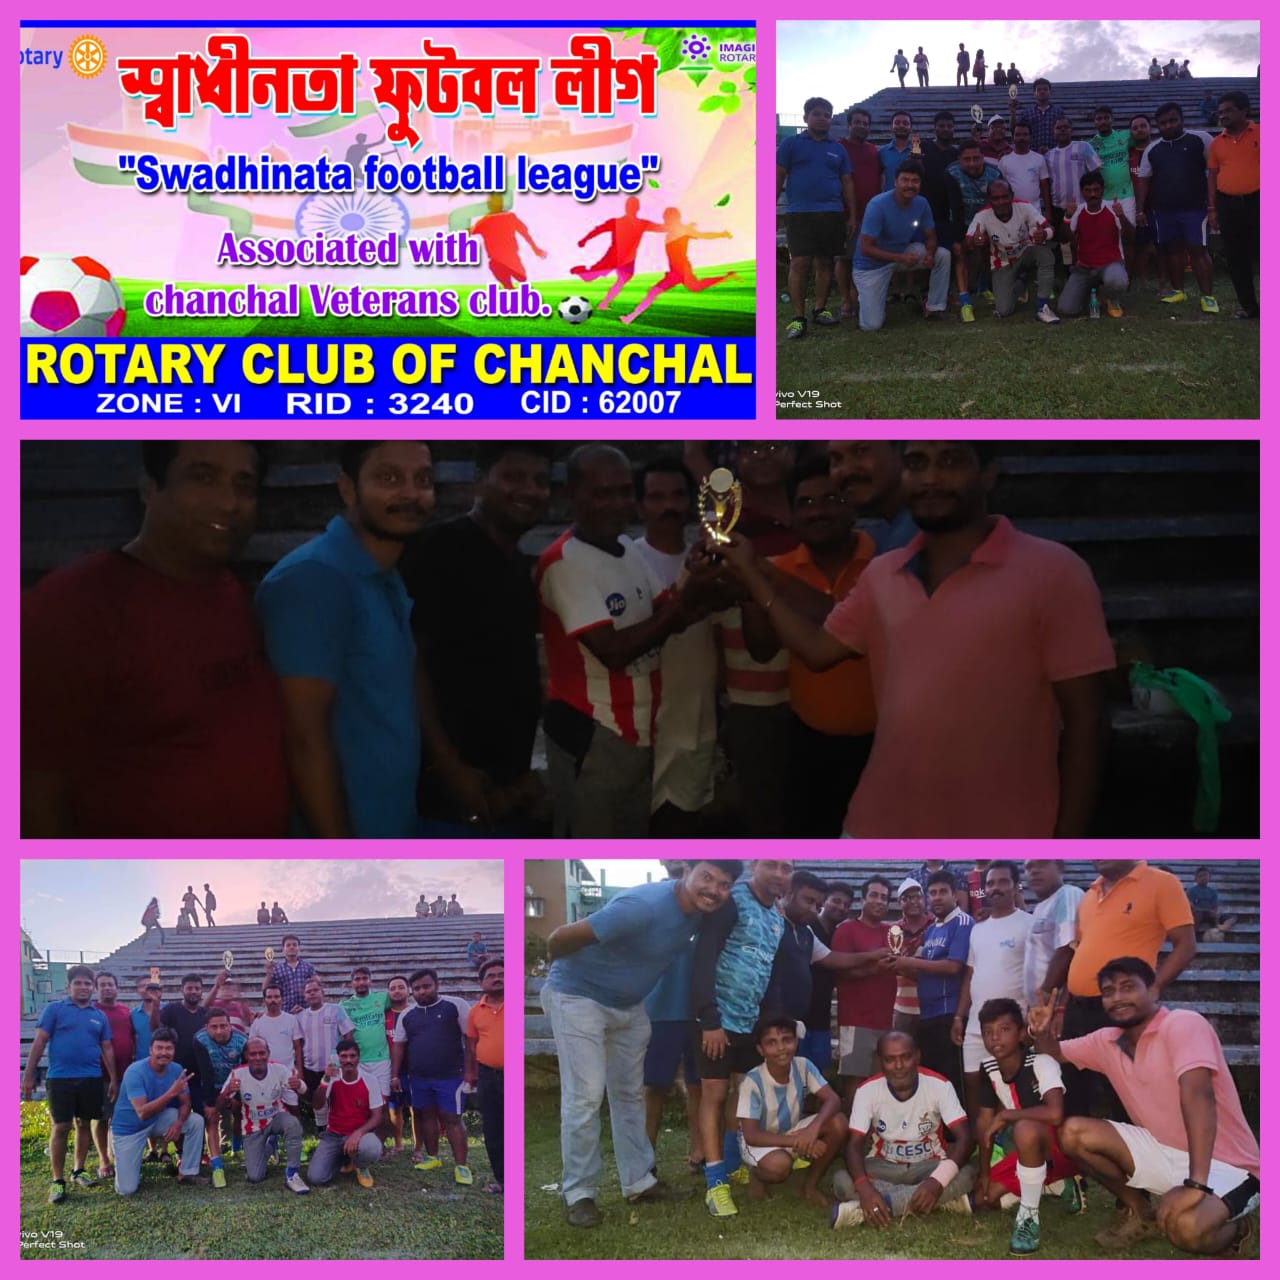 Football tournament in associated with chanchal veterans club.